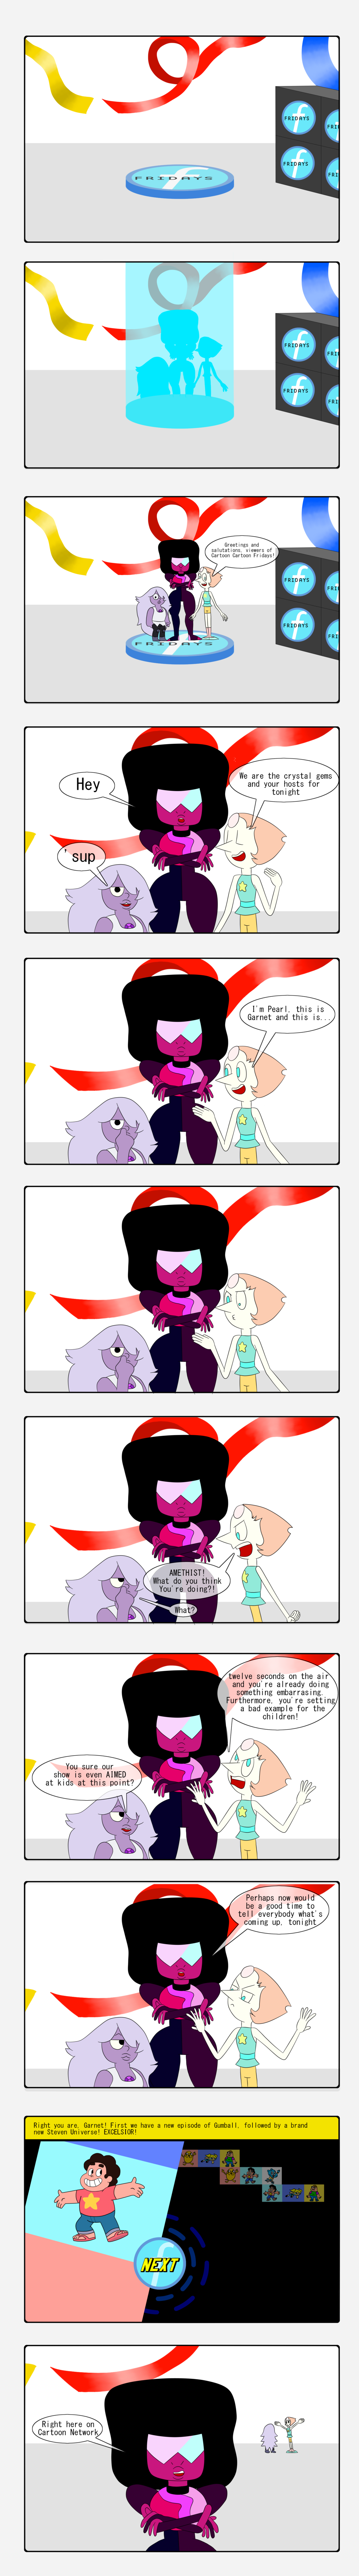 what_if_the_crystal_gems_hosted_ccf___pt